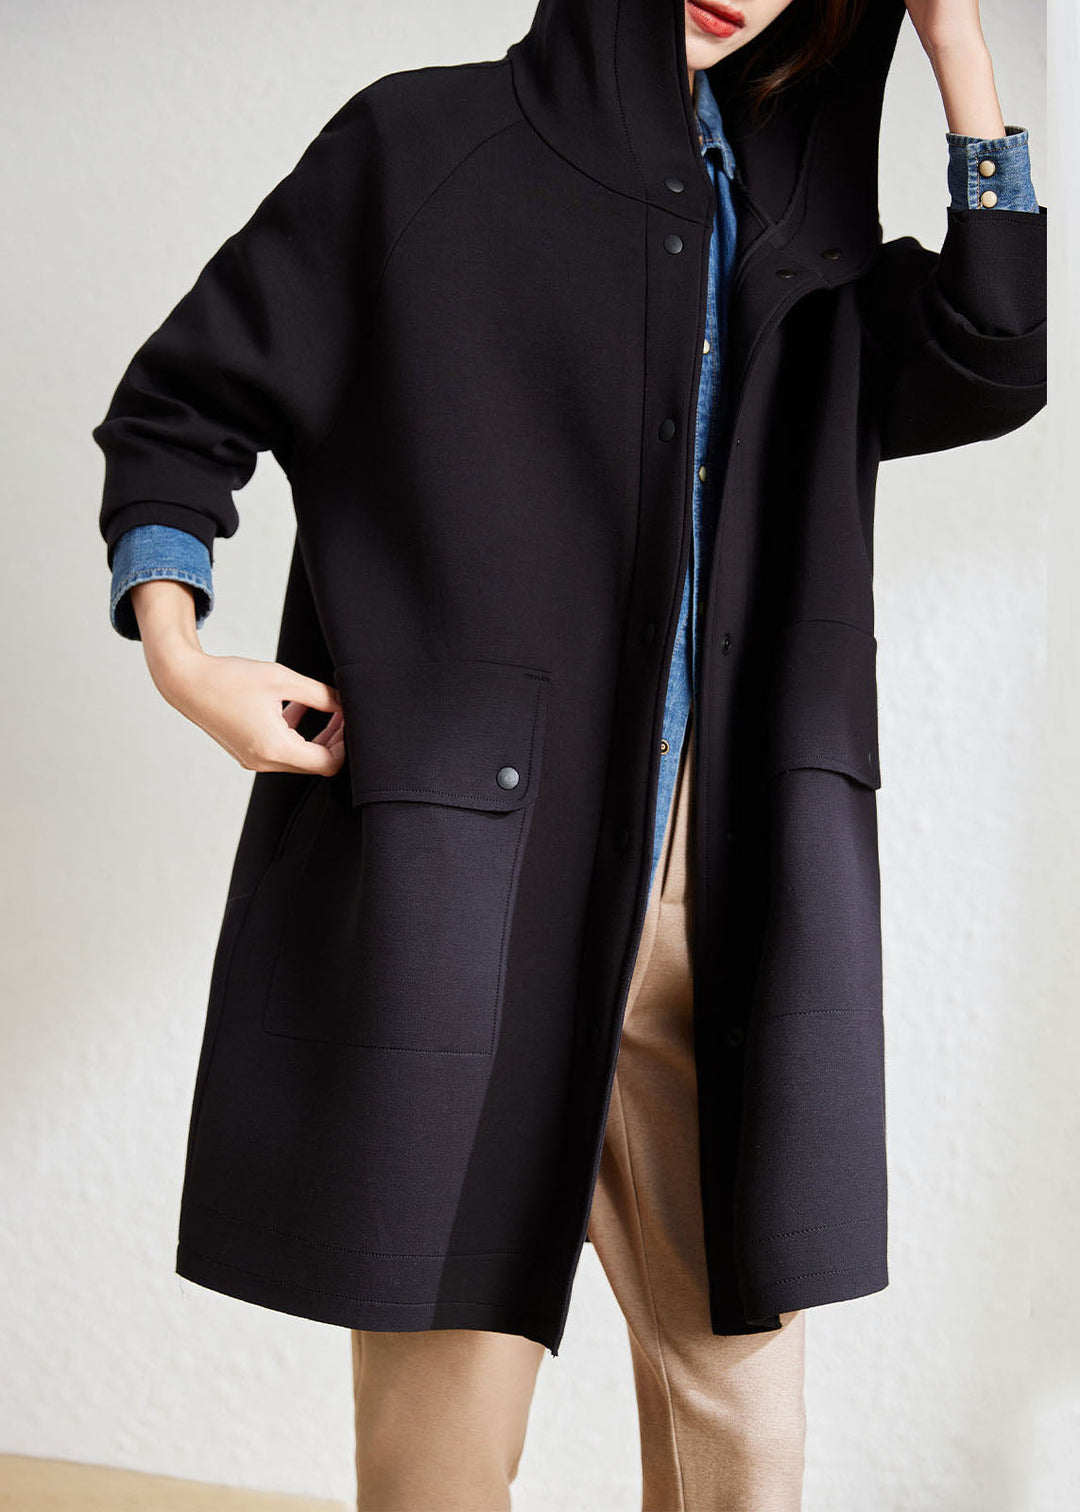 Novelty Black Pockets Patchwork Button Cozy Hooded Coat Fall